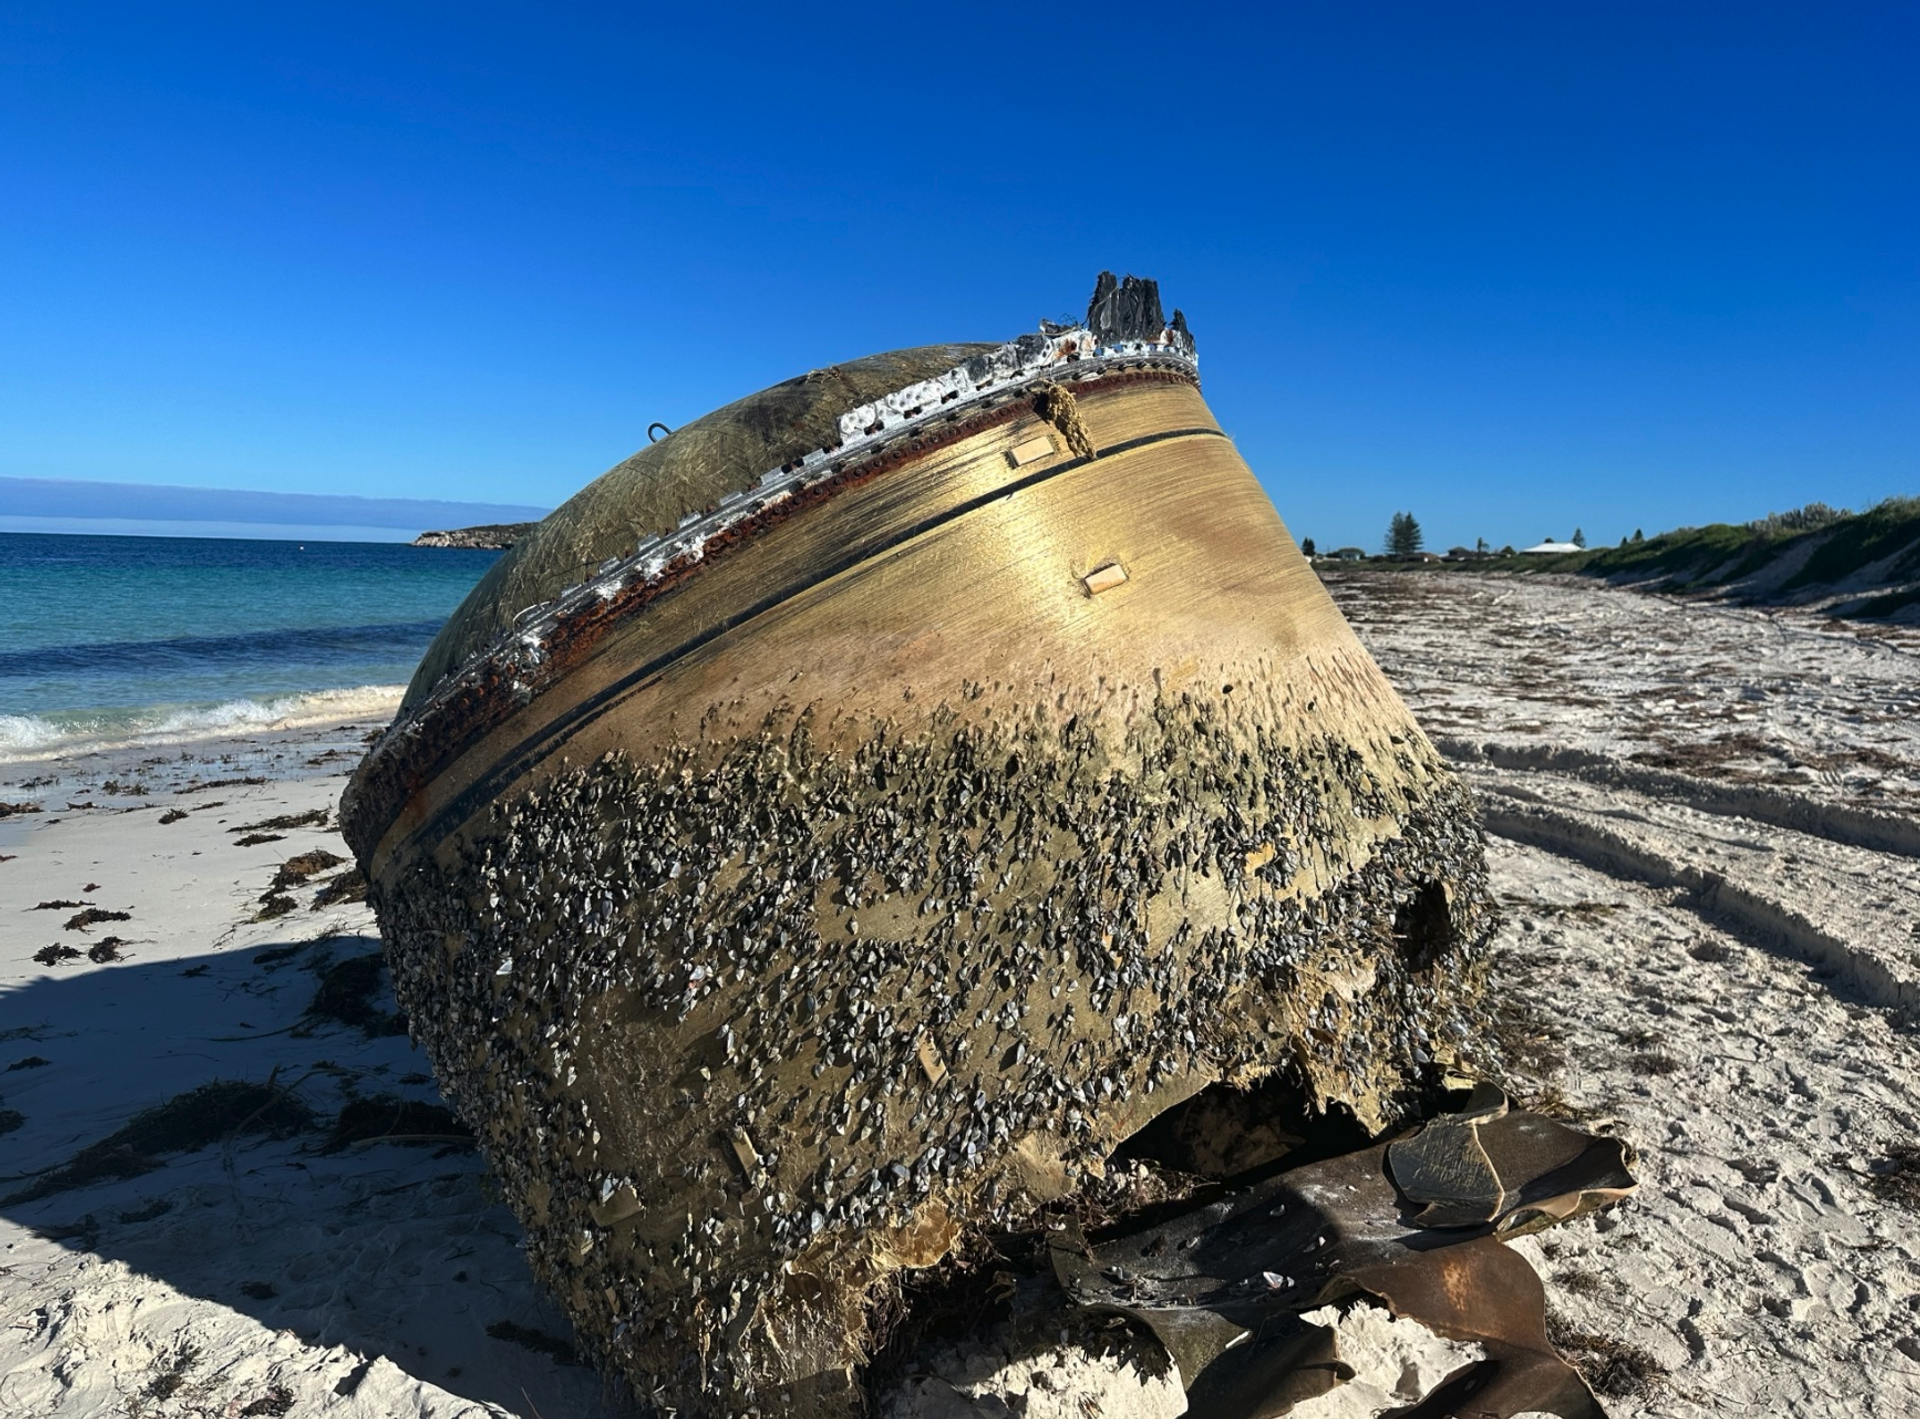 A mystery object suspected of being part of a space launch washed ashore along the Australian coastline, the Australian Space Agency revealed in a statement on July 17, 2023. An investigation into is origin is ongoing. - Sputnik International, 1920, 17.07.2023